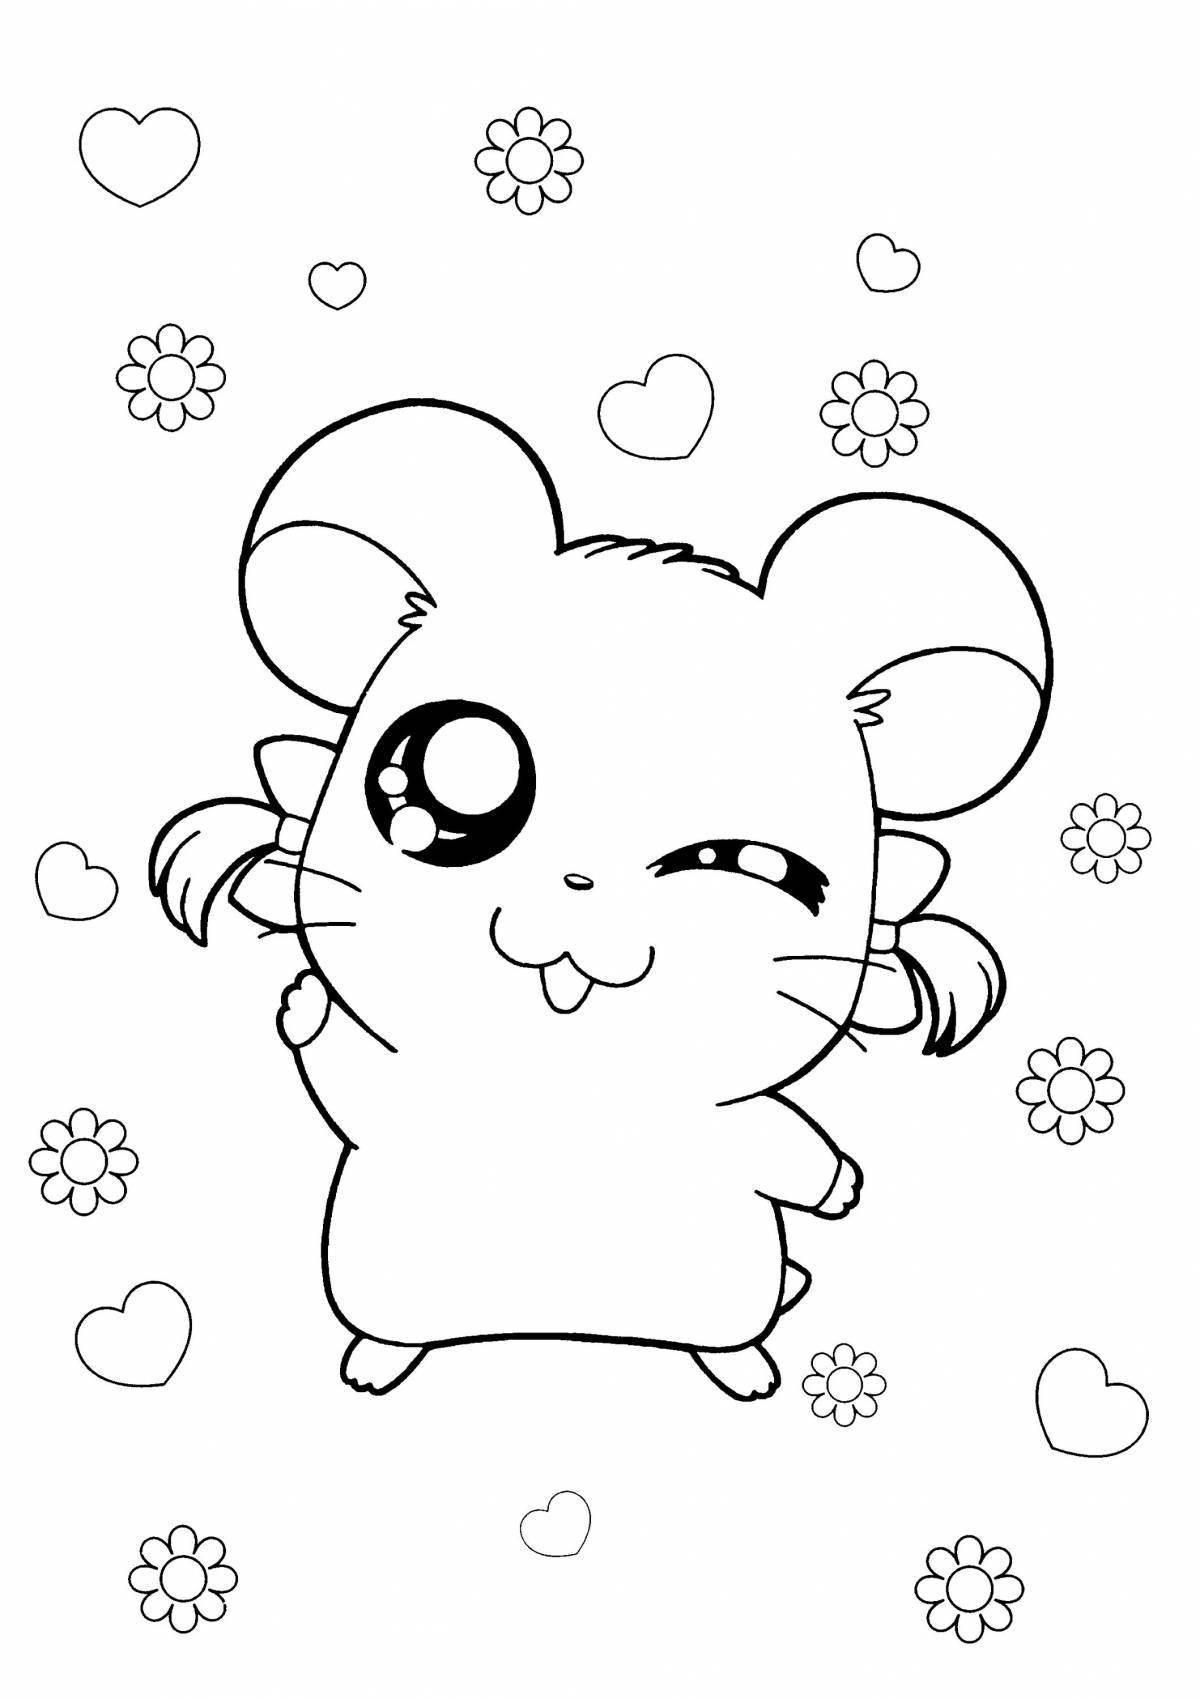 Cute mouse coloring book